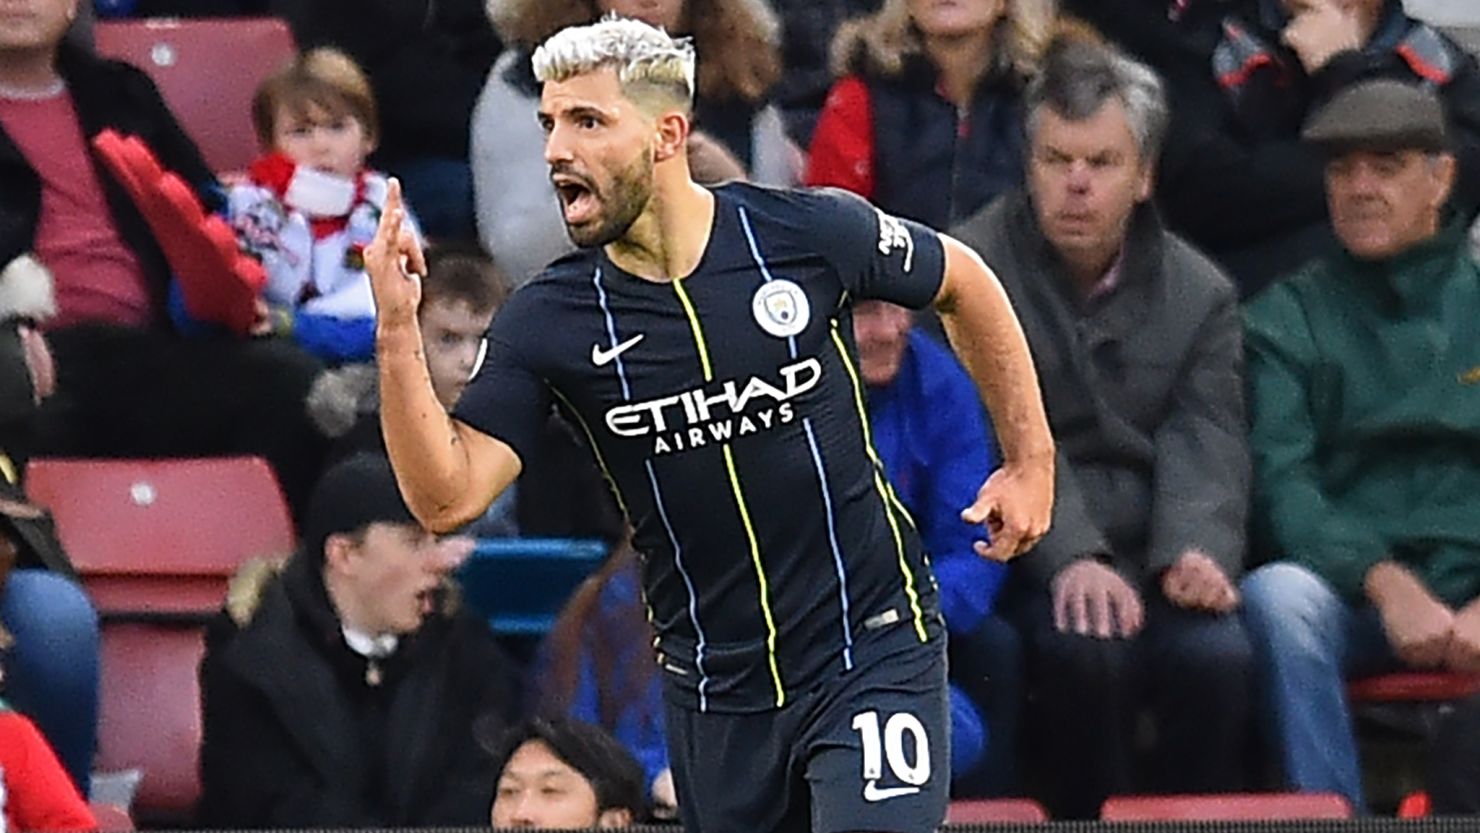 Manchester City's Argentinian striker Sergio Aguero celebrates after scoring its third goal during the English Premier League football match against Southampton at St Mary's Stadium.